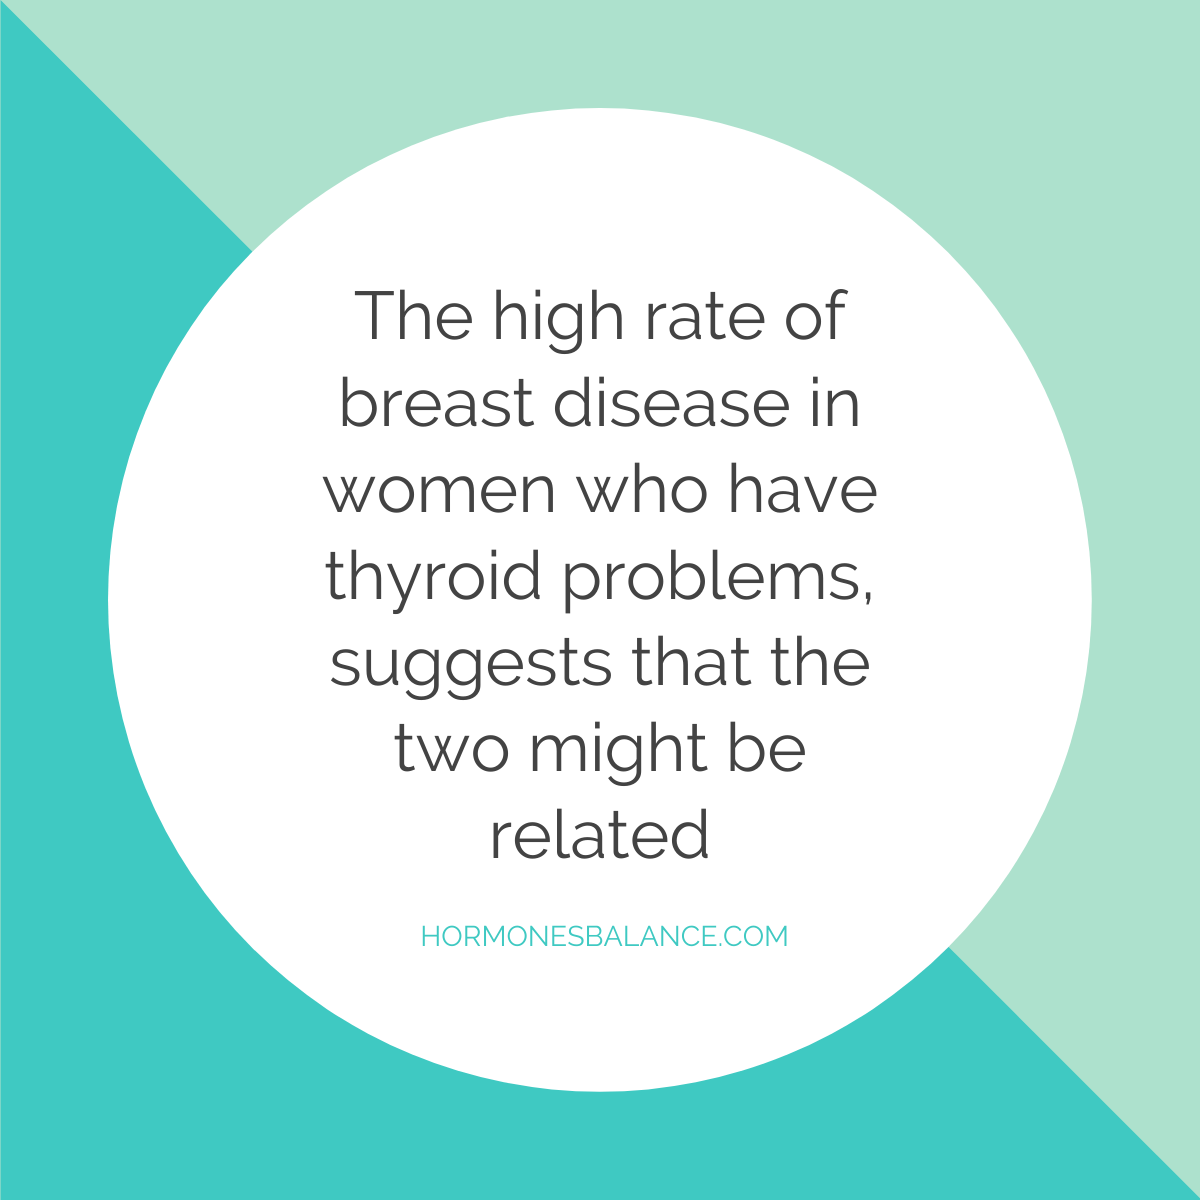 It’s interesting to note that there is a high rate of breast disease in women who have thyroid problems, suggesting that the two might be related.